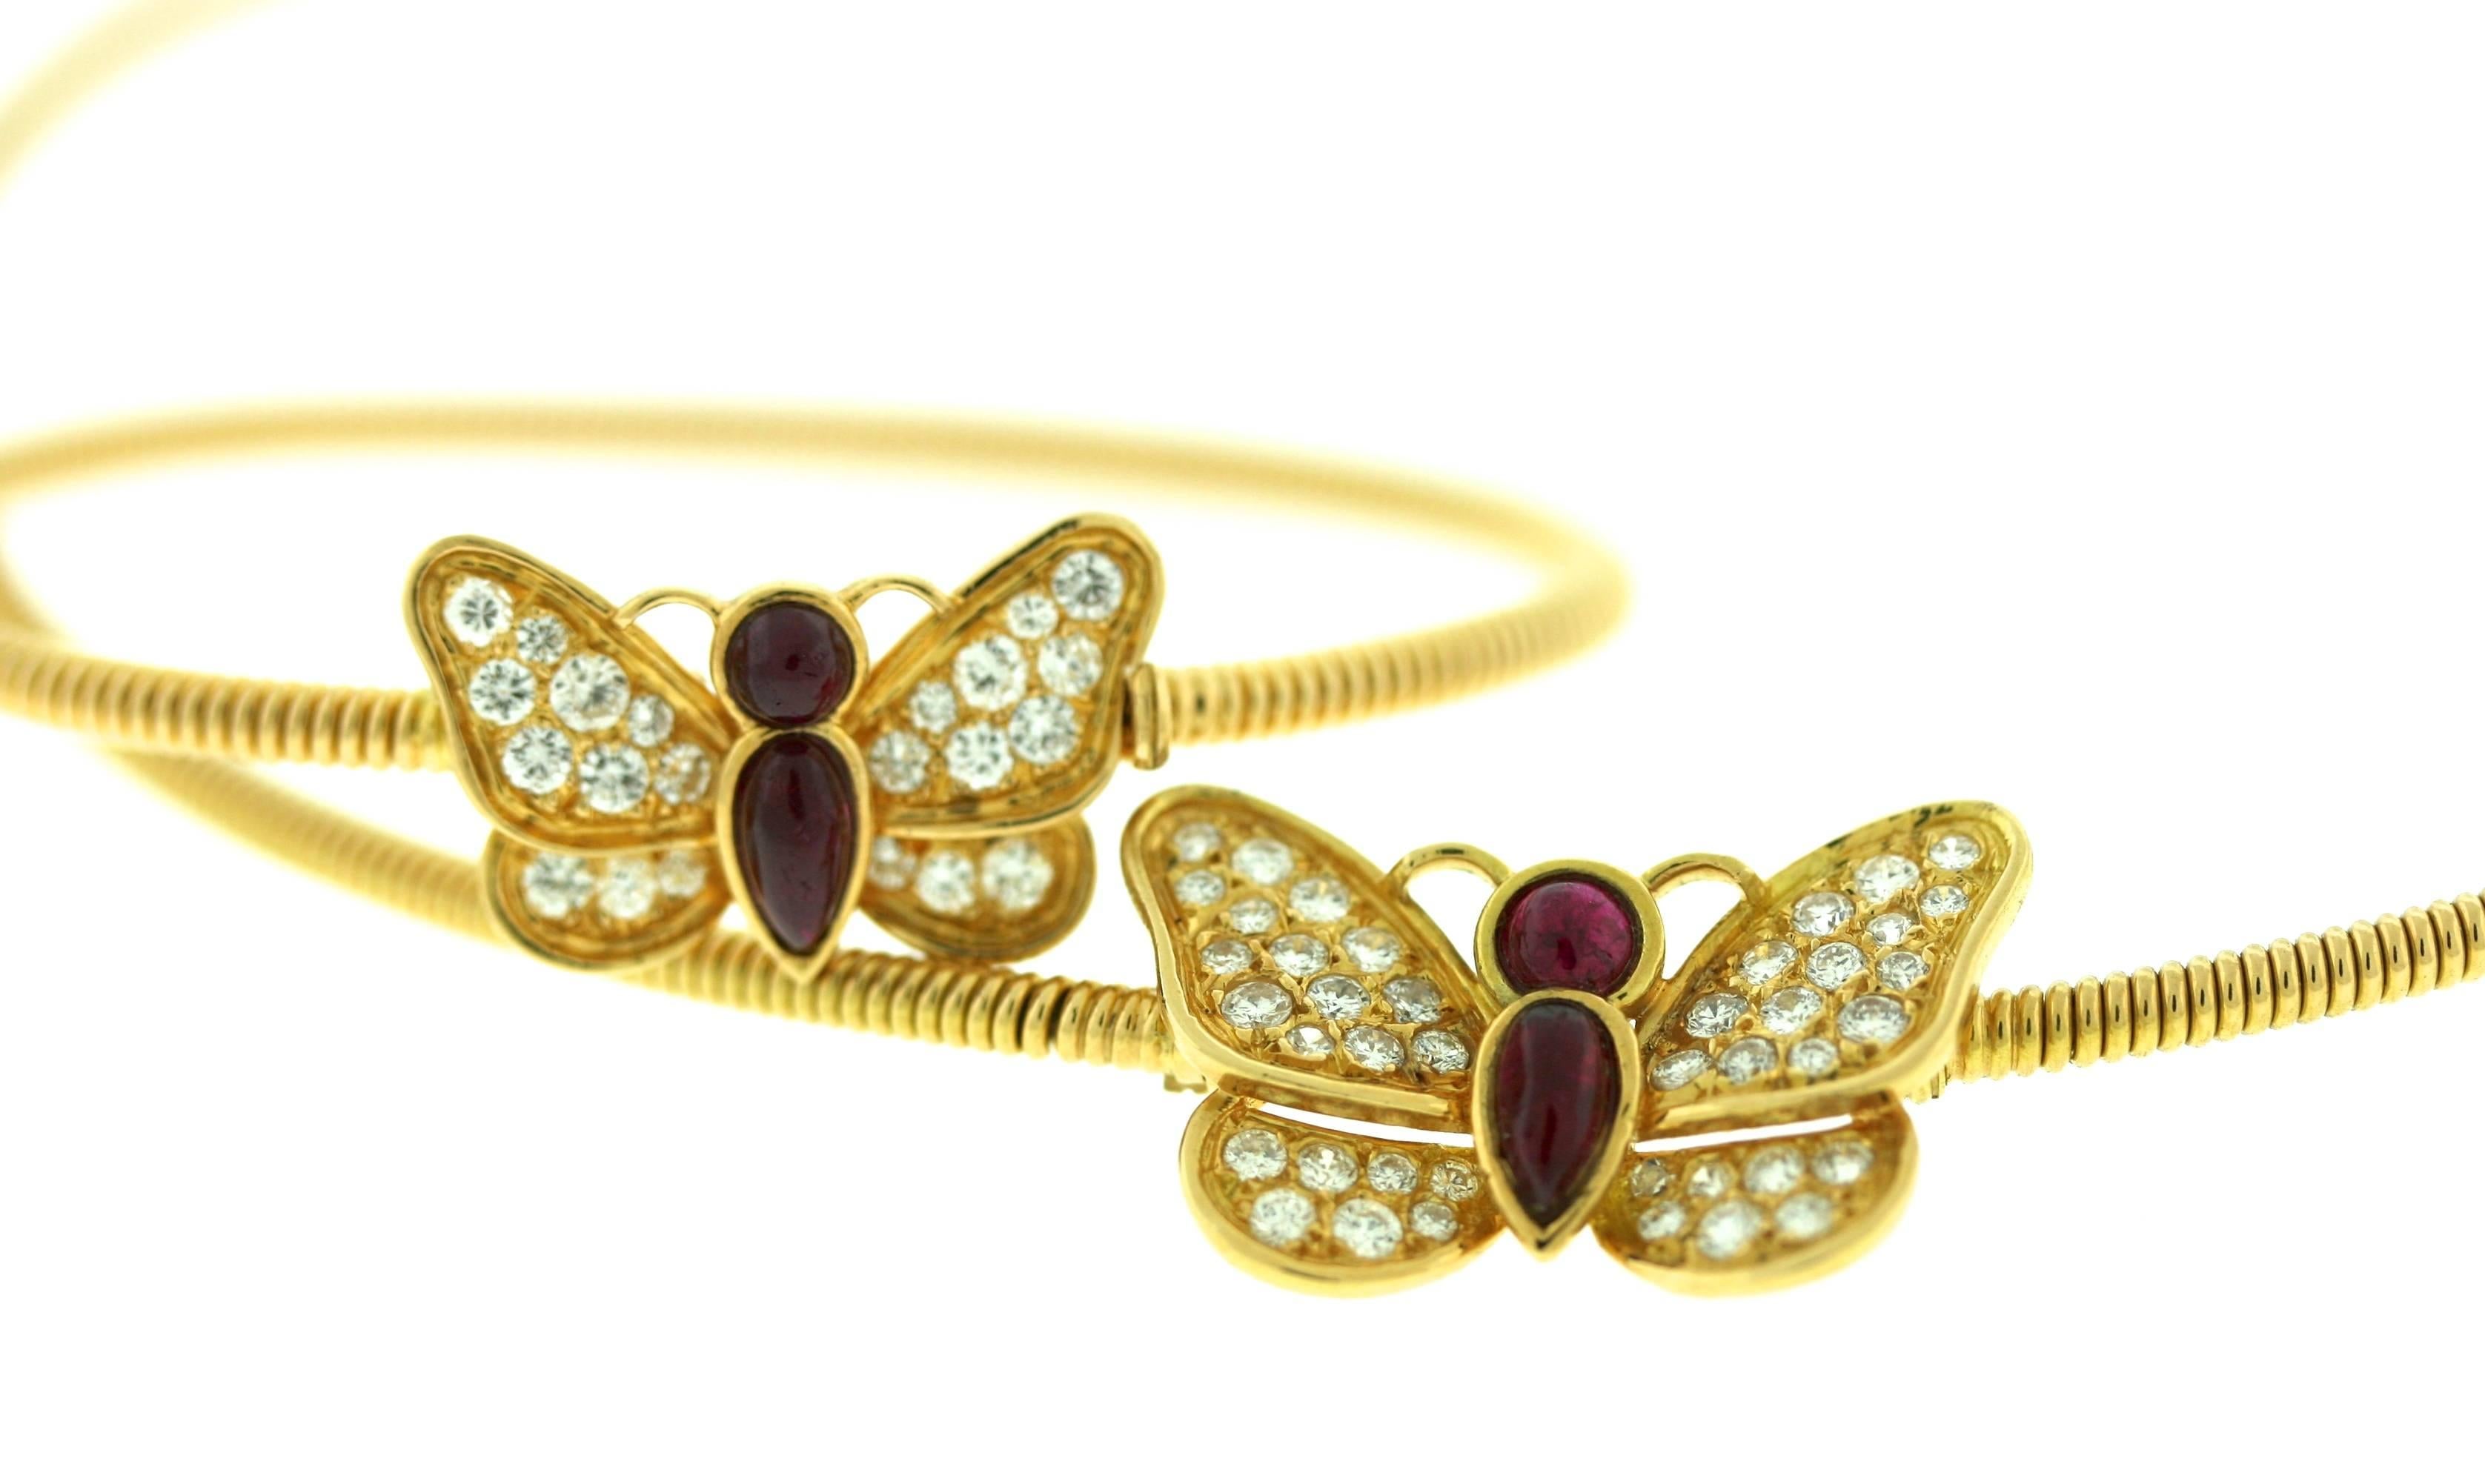 Cartier Paris 18kt gold choker and bracelet suite set with diamonds and cabochon rubies in a charming butterly motif. Both bracelet and choker are made from finely coiled gold each centering a butterfly. Internal circumference of choker is 14.5